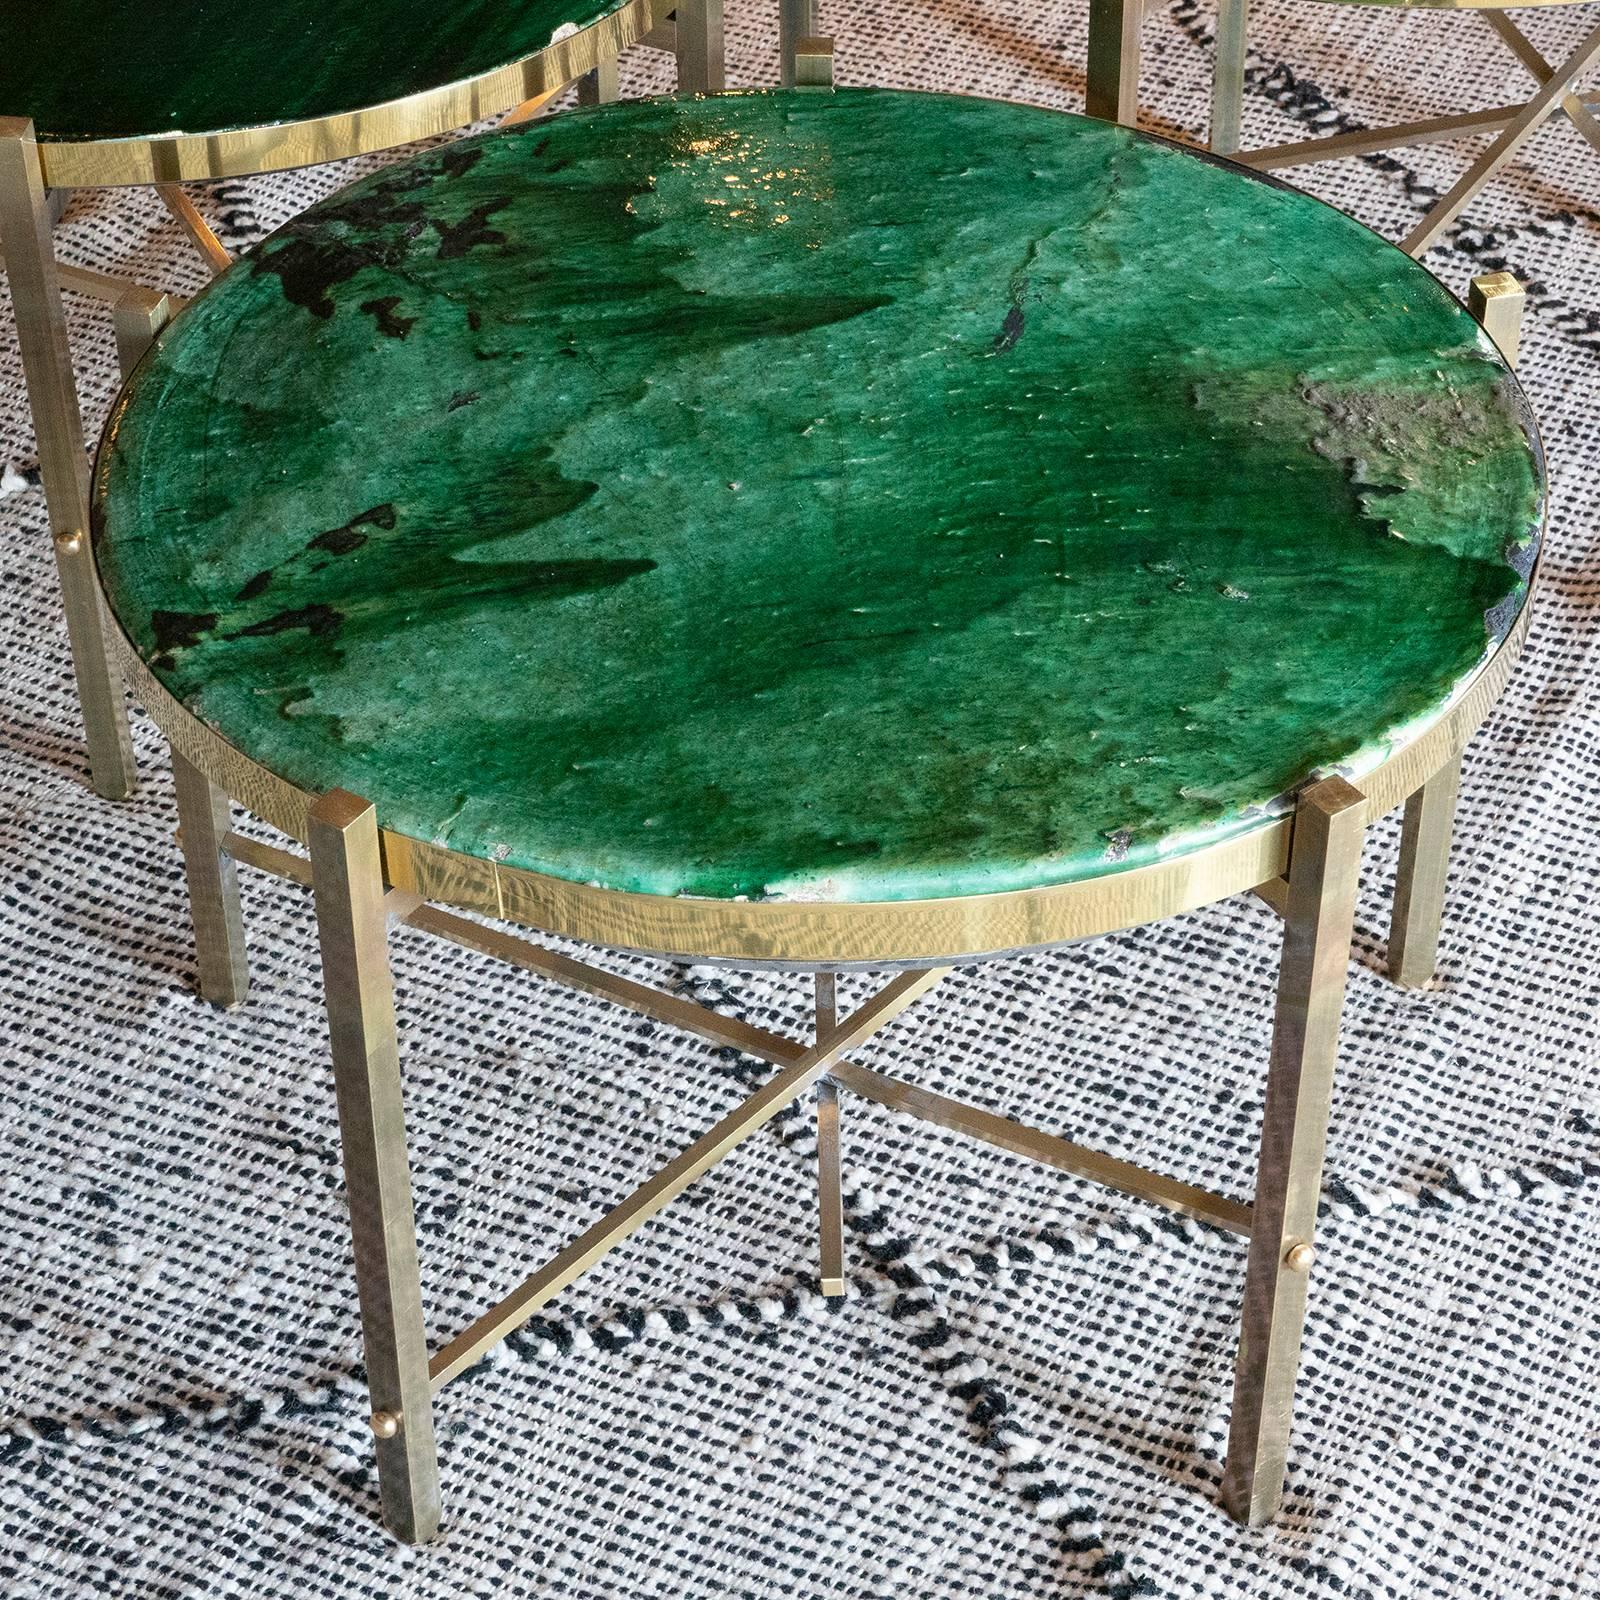 Contemporary Set of Green Glazed Ceramic Coffee Tables